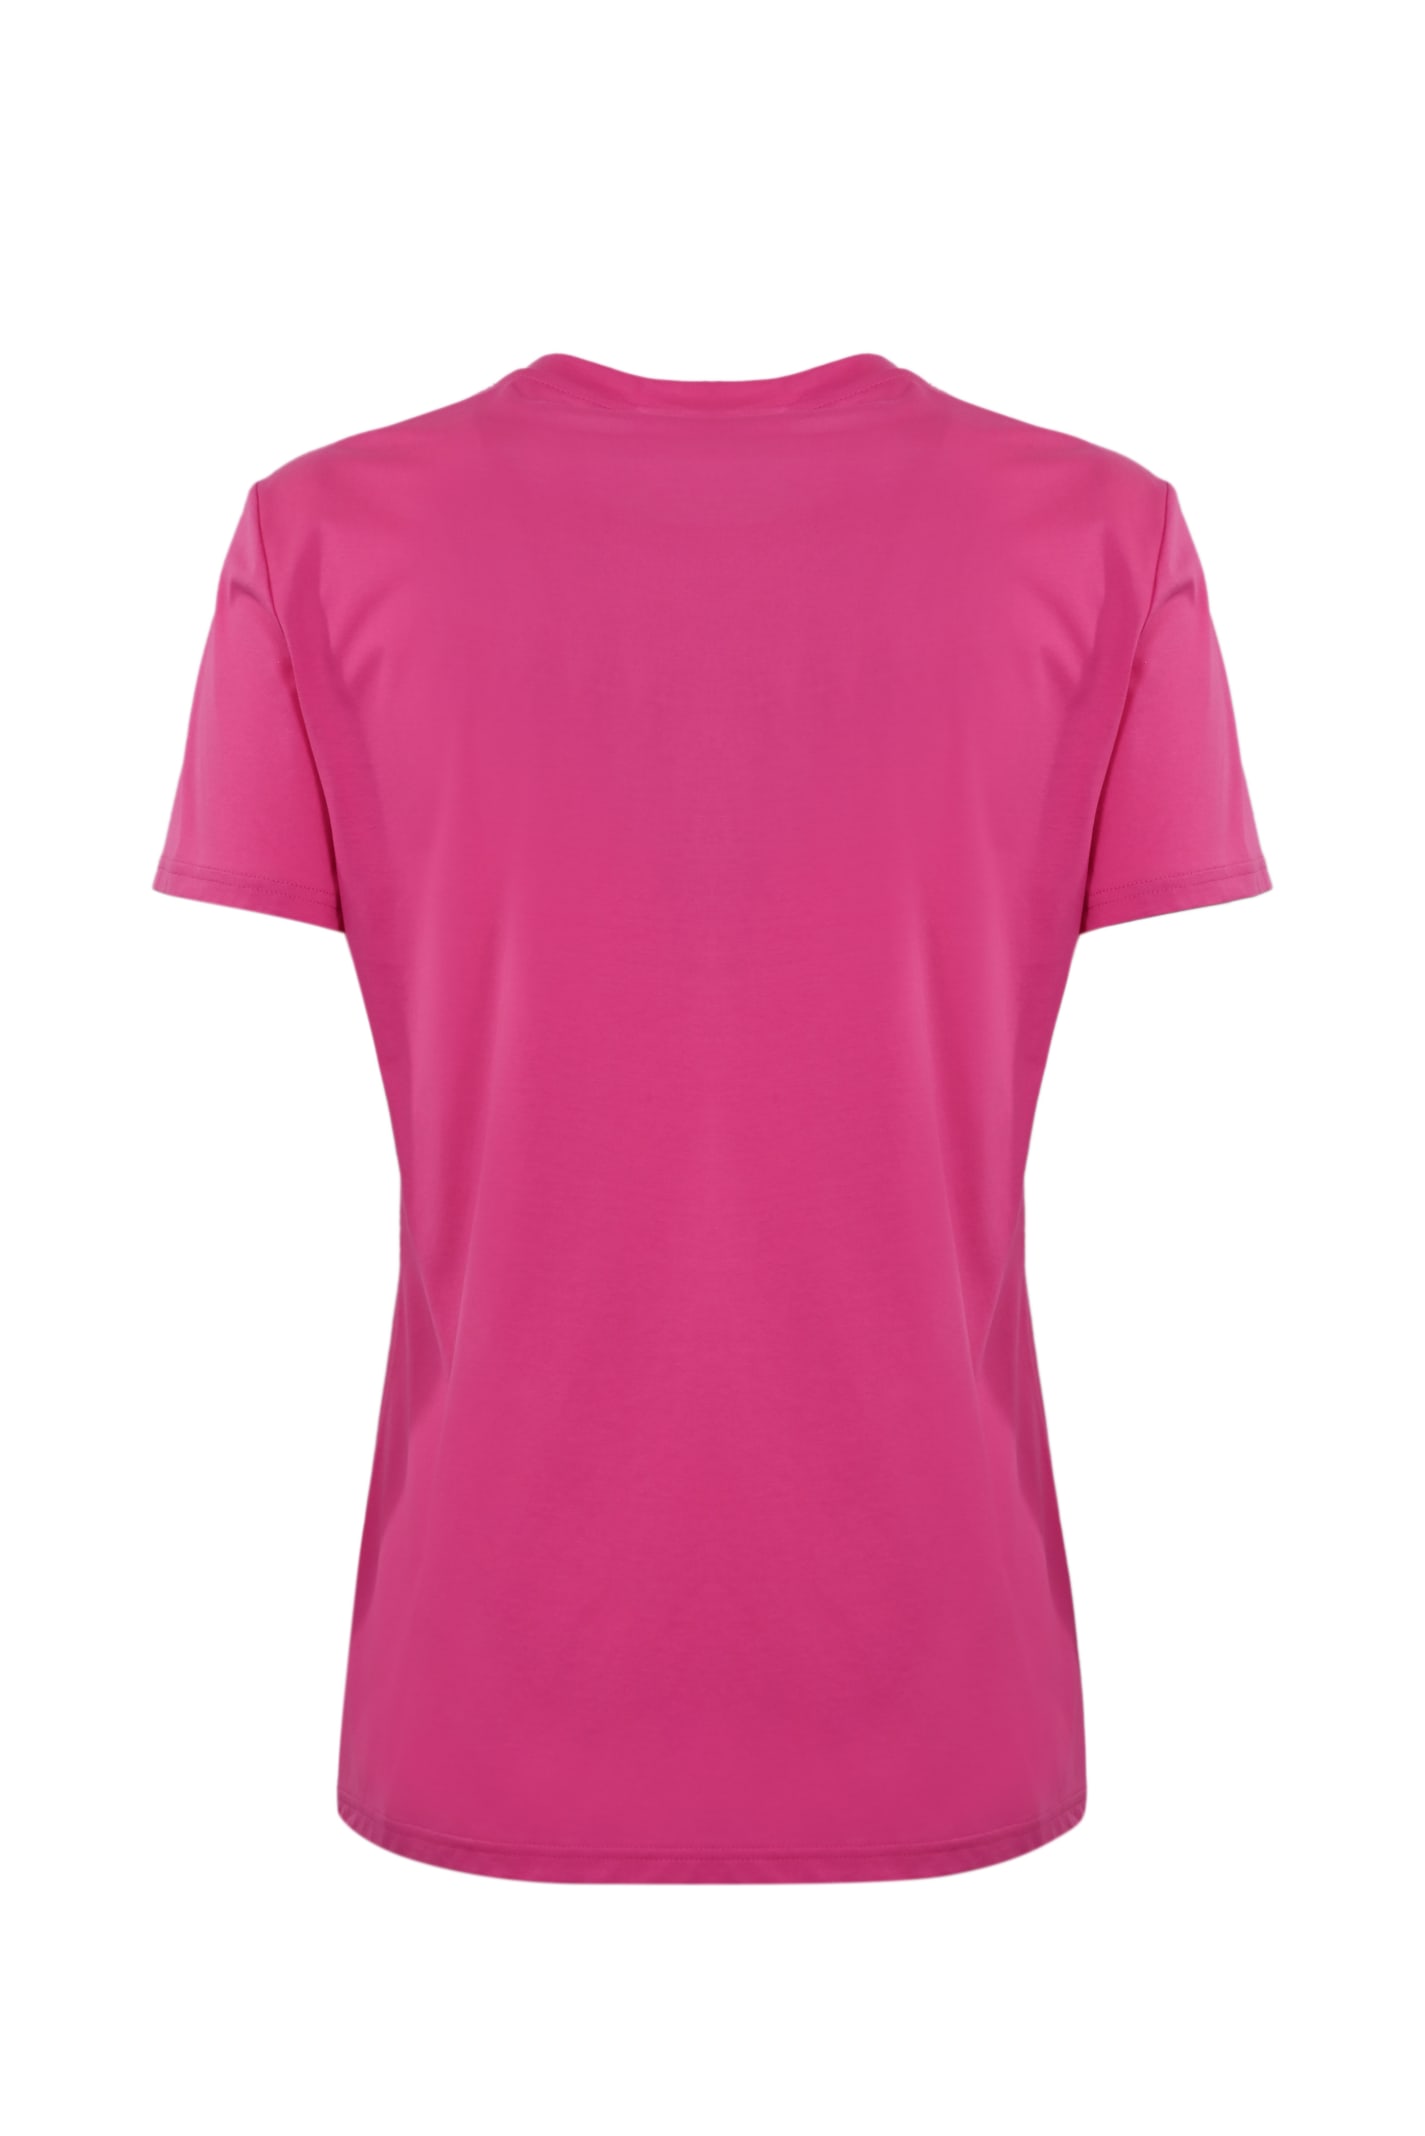 Shop Max Mara Cotton T-shirt With Lappole Feathers In Fucsia